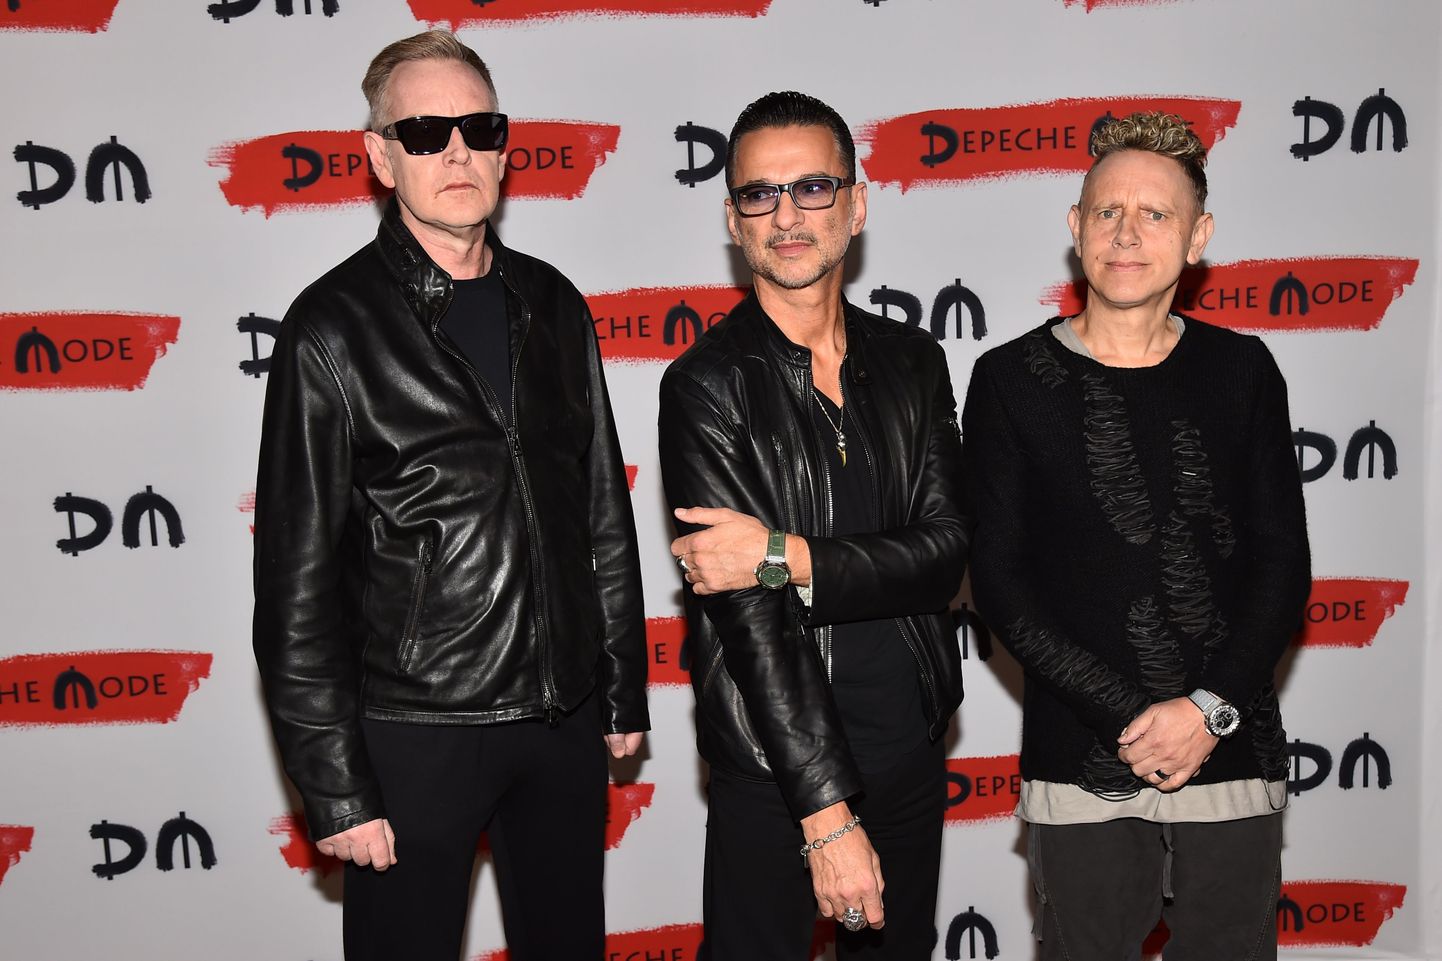 Members of rock band Depeche Mode (from left) Andrew Fletcher, Dave Gahan and Martin Gore pose during a press conference to promote their new album "Spirit" on October 11, 2016 in Milan.  / AFP PHOTO / GIUSEPPE CACACE